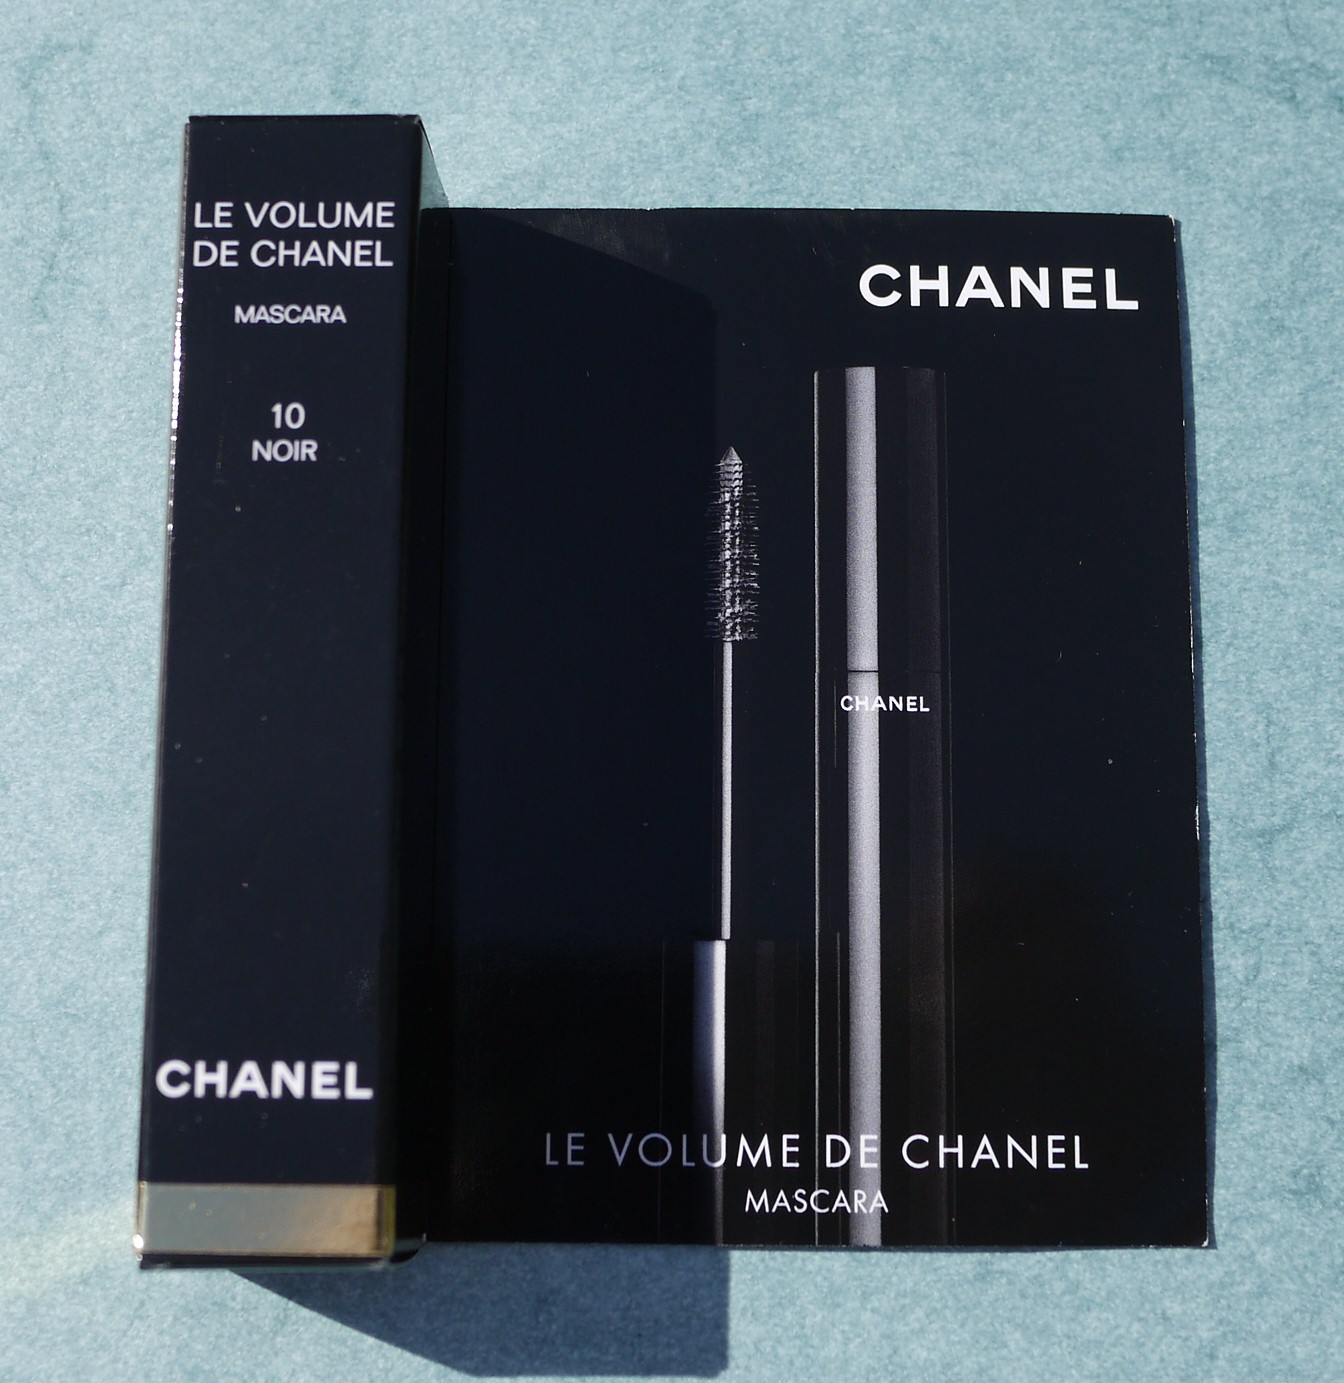 Best Things in Beauty: Flash Giveaway Contest: Chanel Le Volume de